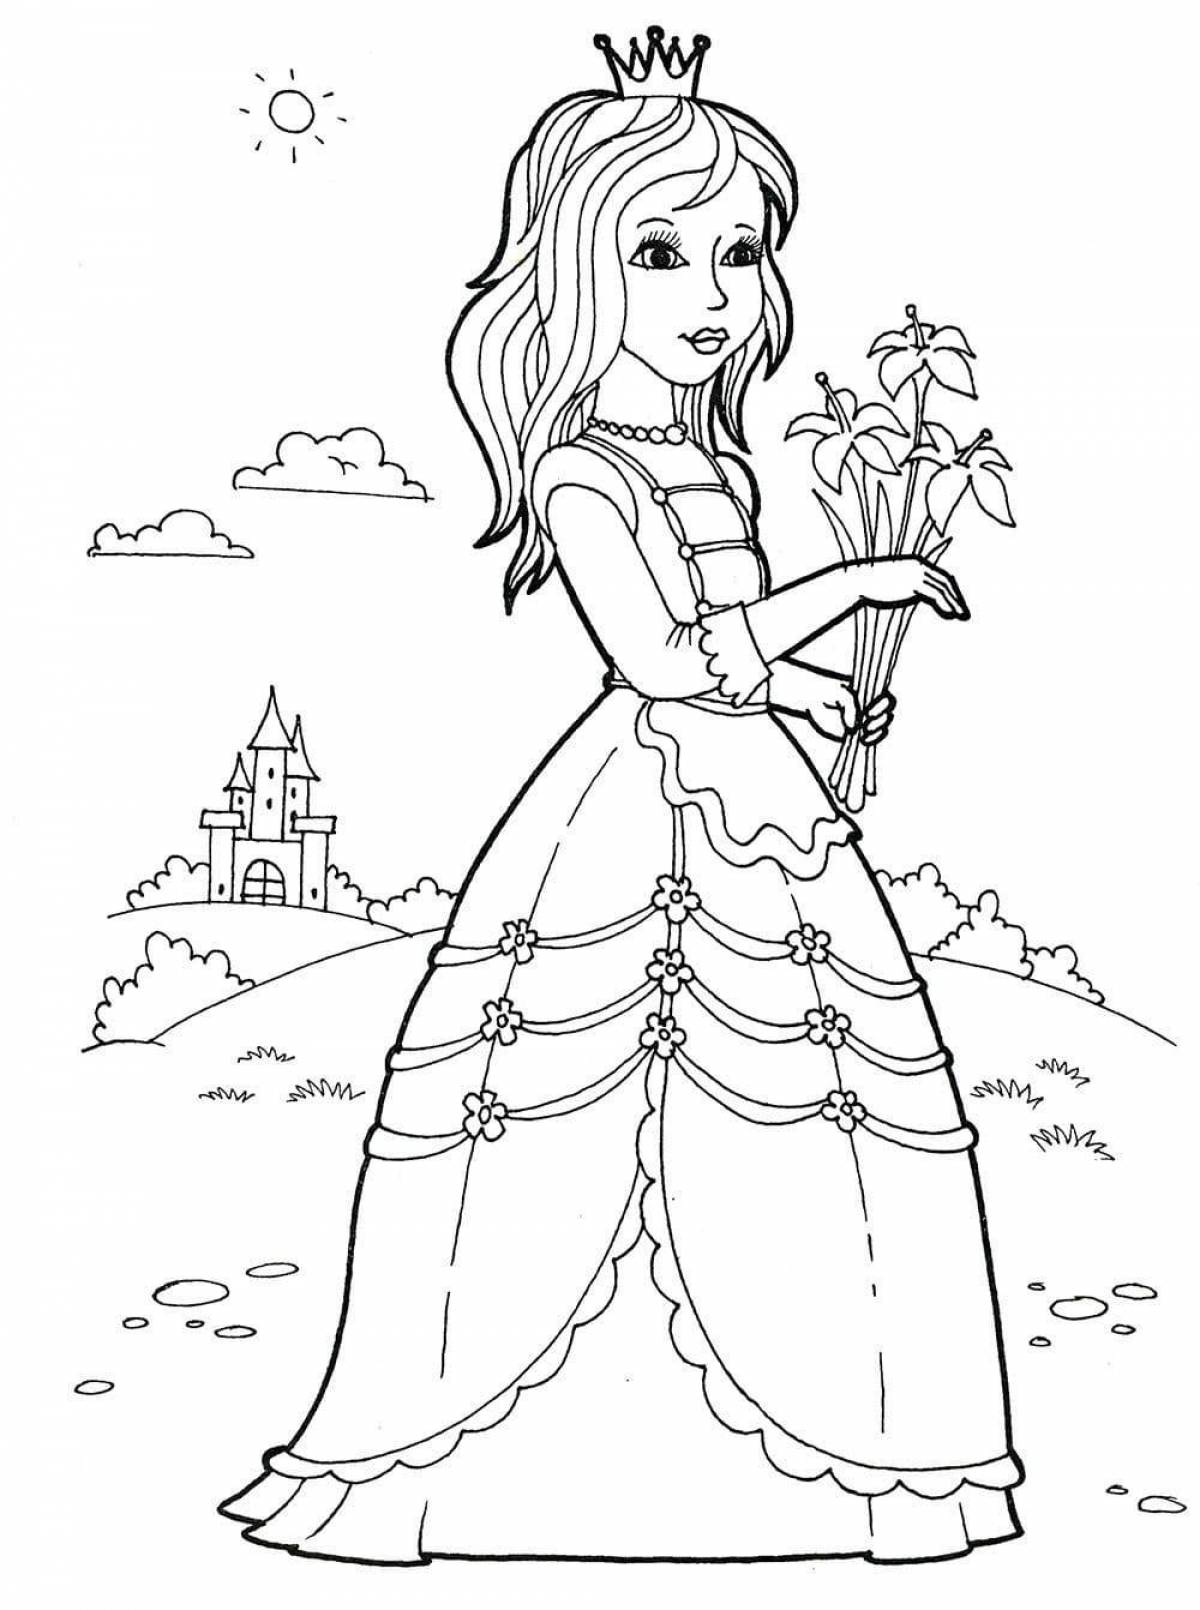 Luxury princess coloring book for kids 5-6 years old